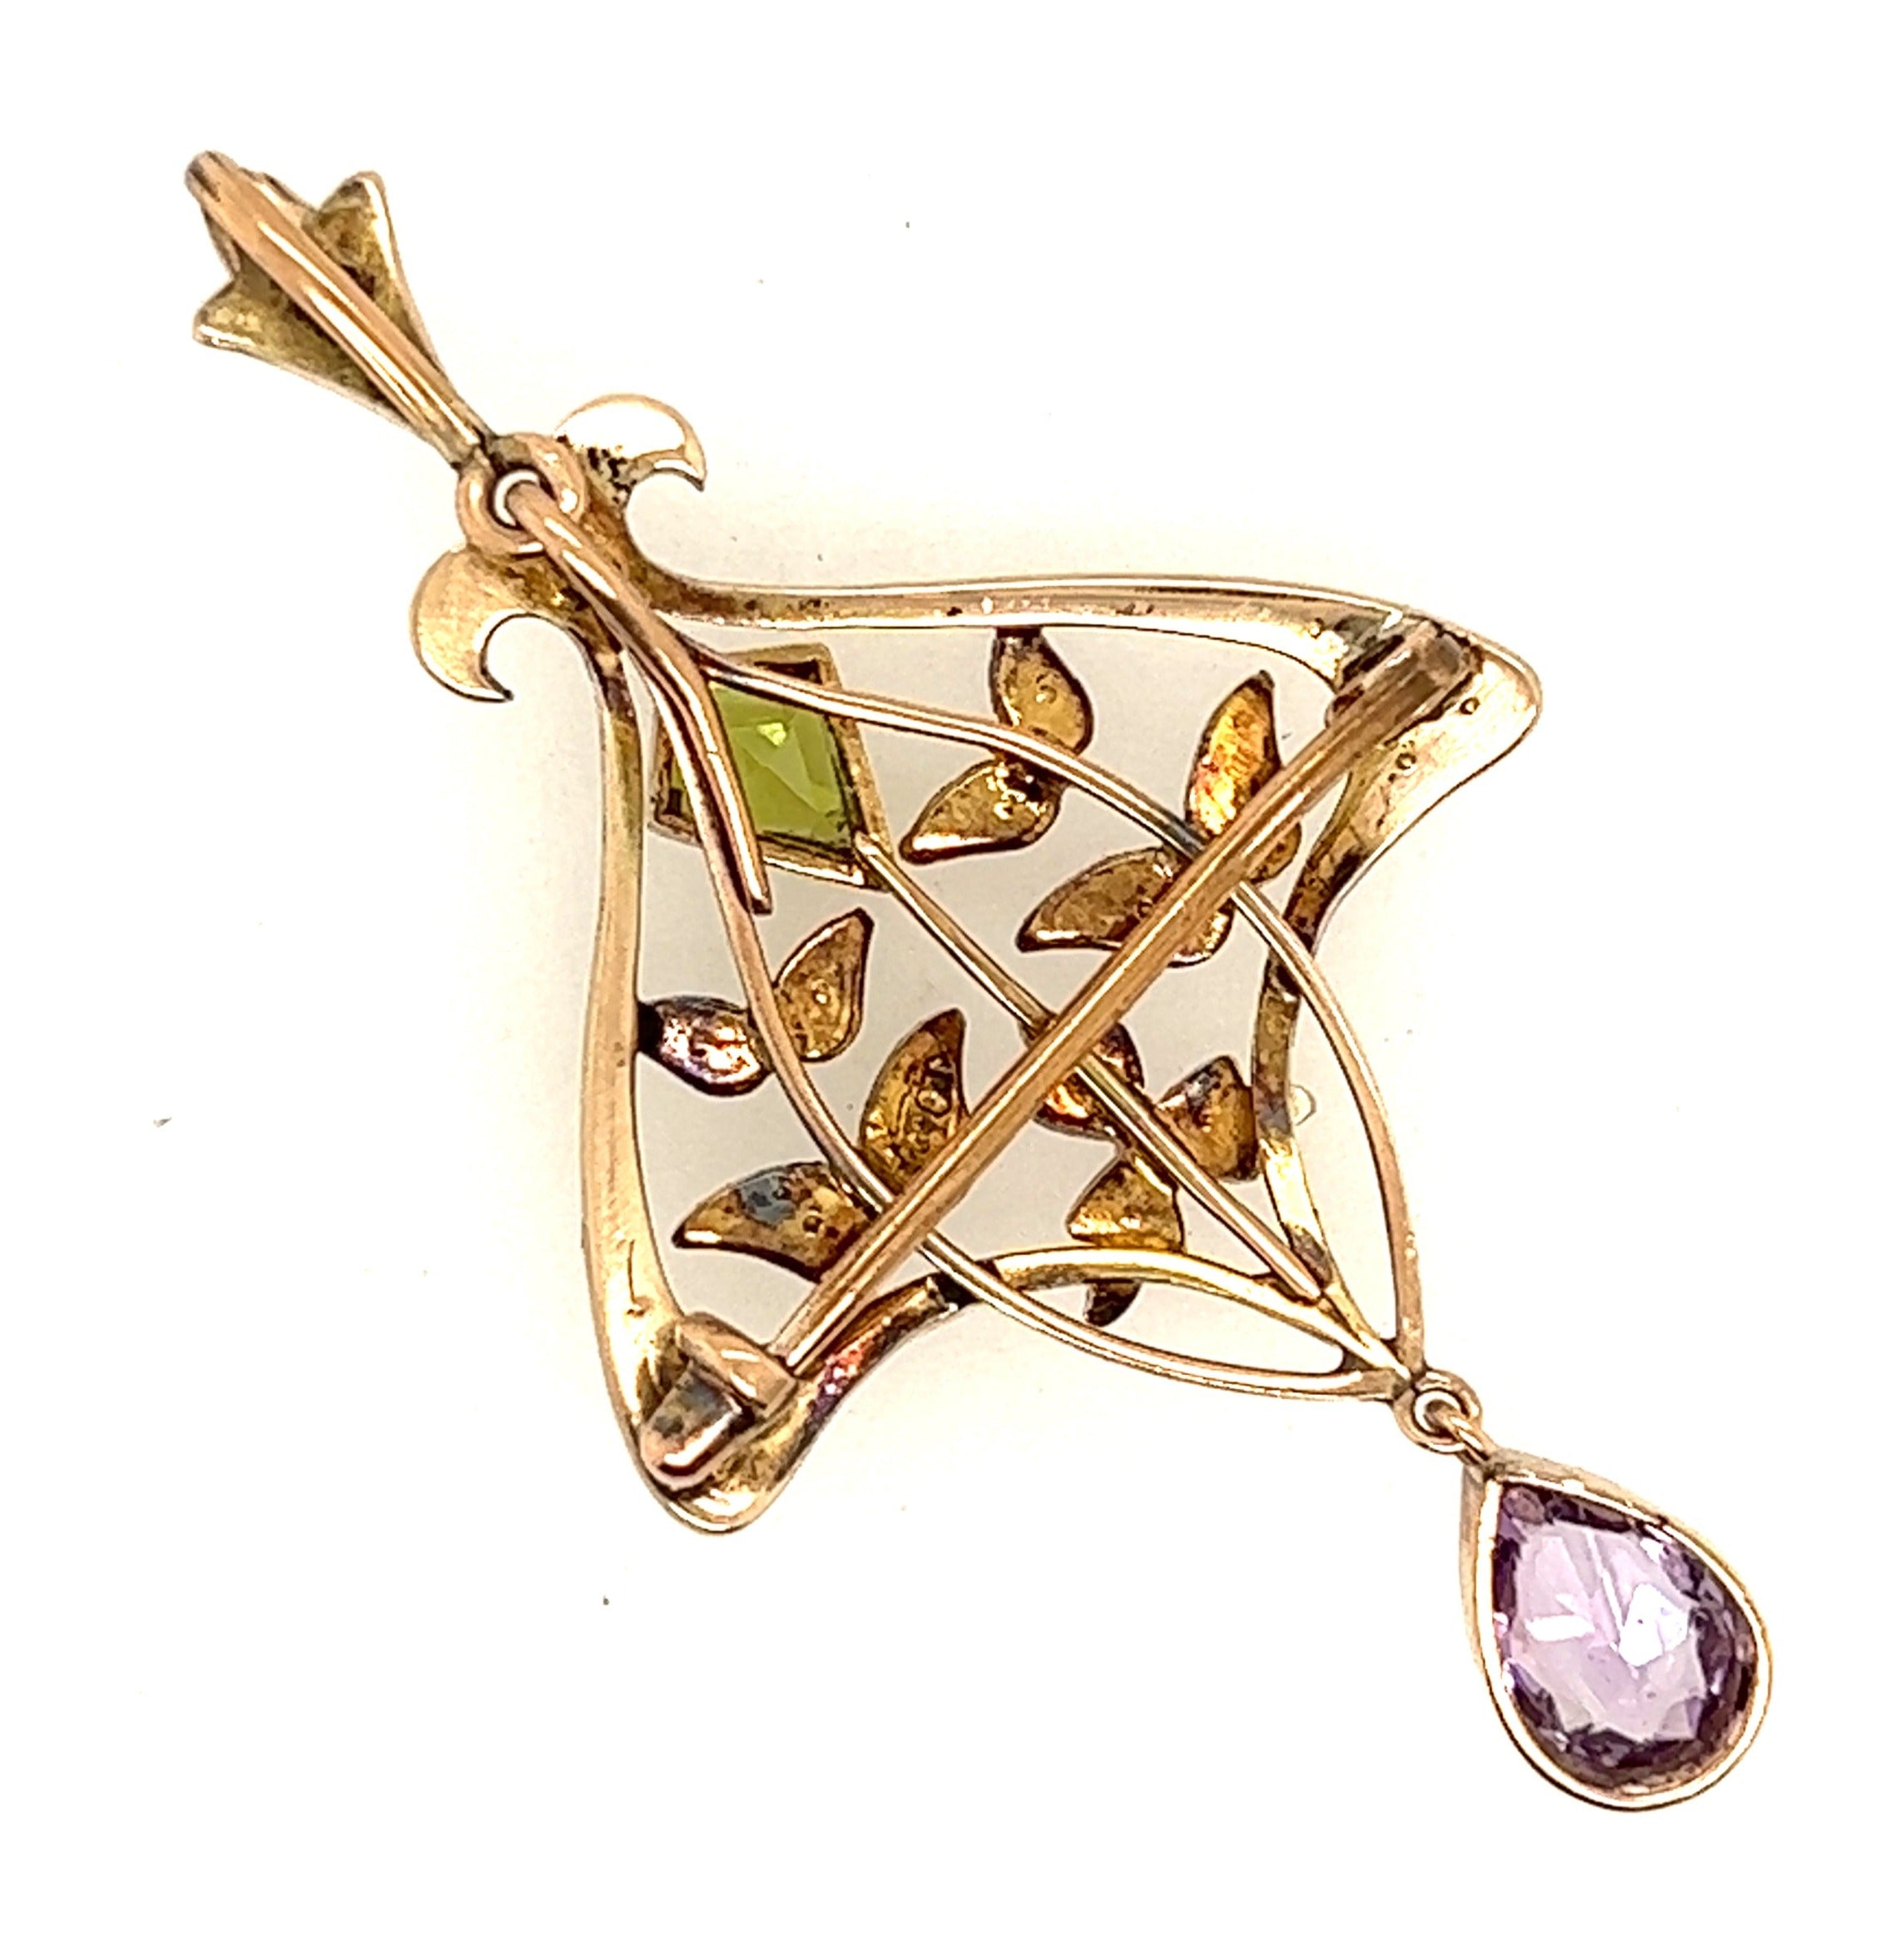 9ct Yellow Gold Brooch/Pendant with Peridot, Amethyst & Seed Pearl Gemstones